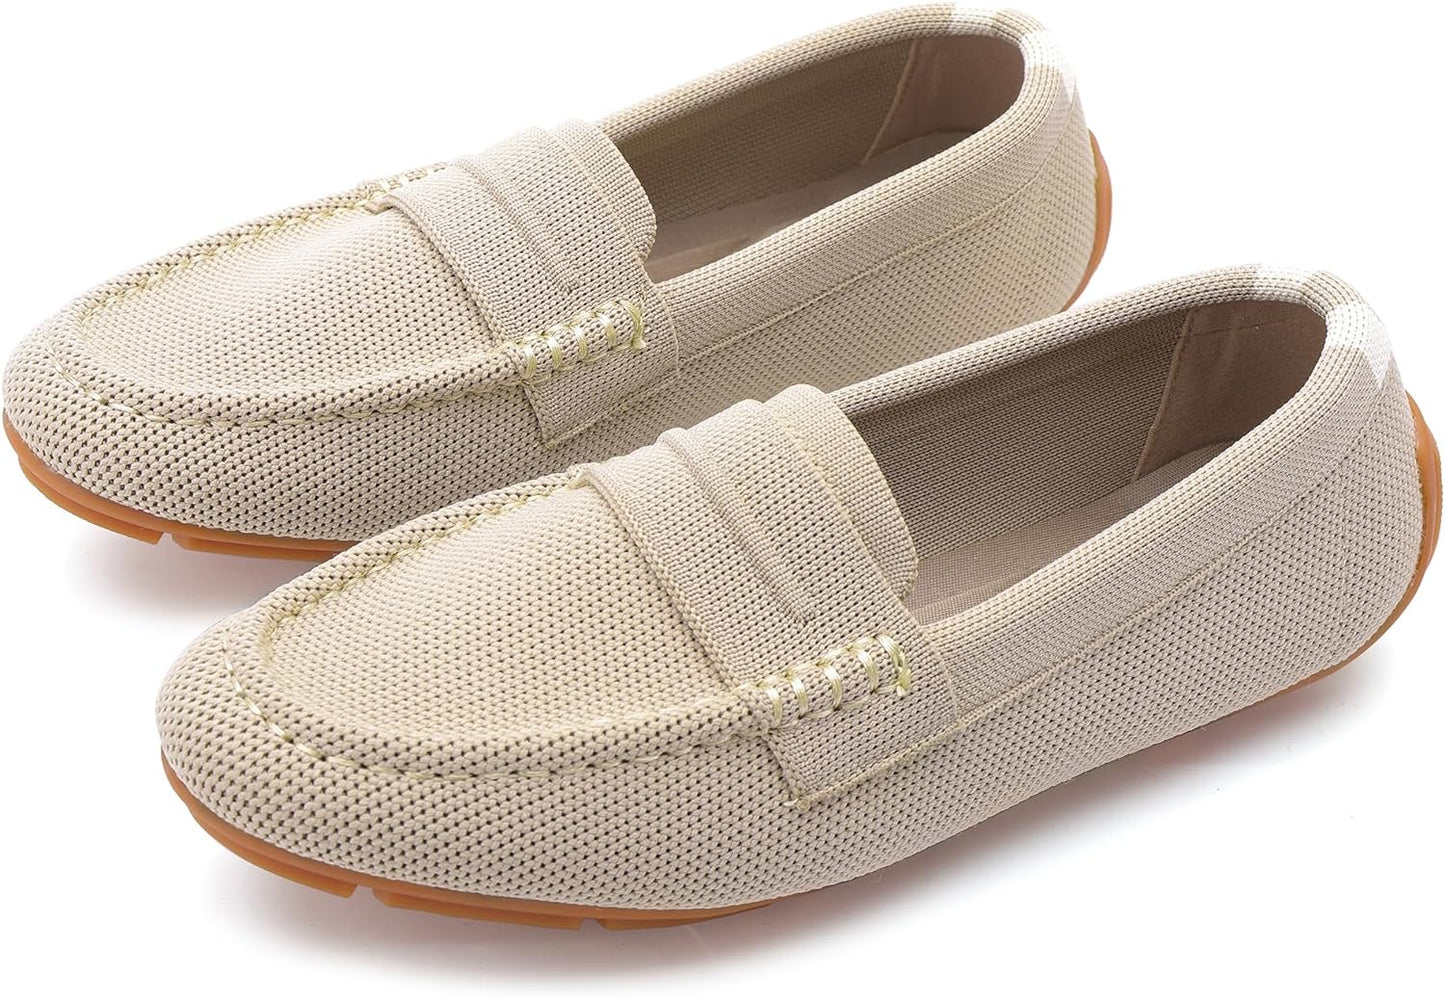 Women’s Lightweight Knit Loafers Driving Loafer Casual Slip On Flat Comfortable Boat Shoes Flat Bottom Breathable Shoes-7.5 Apricot